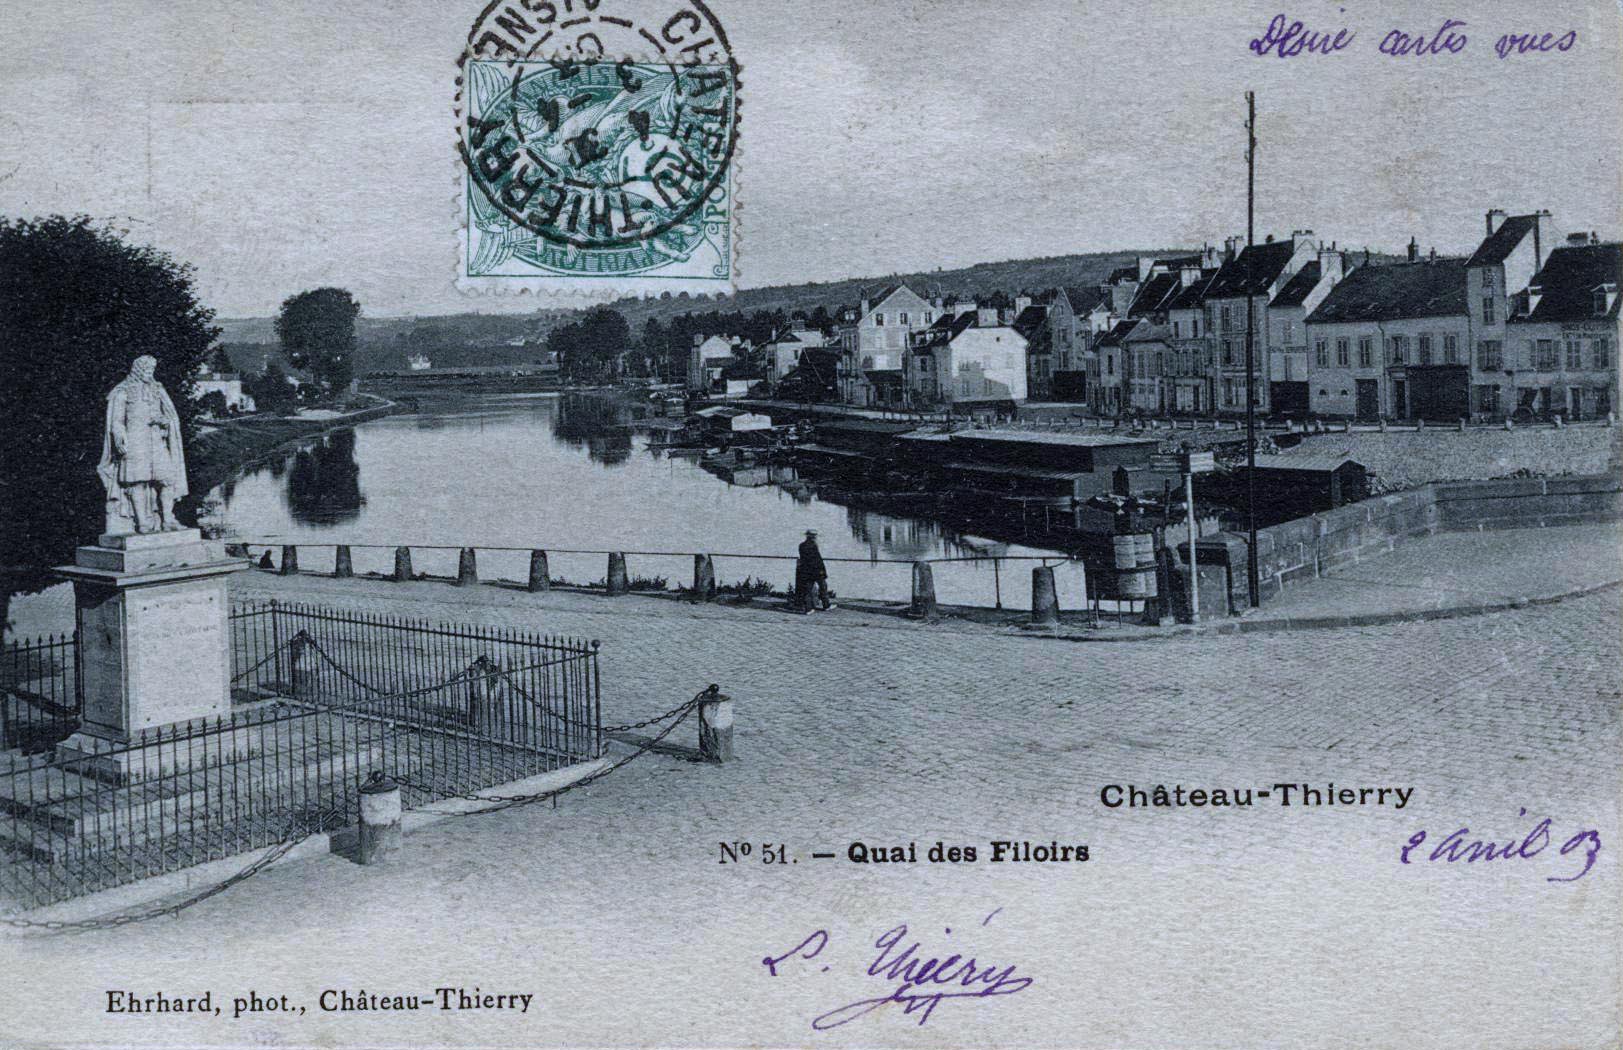 Chteau-Thierry